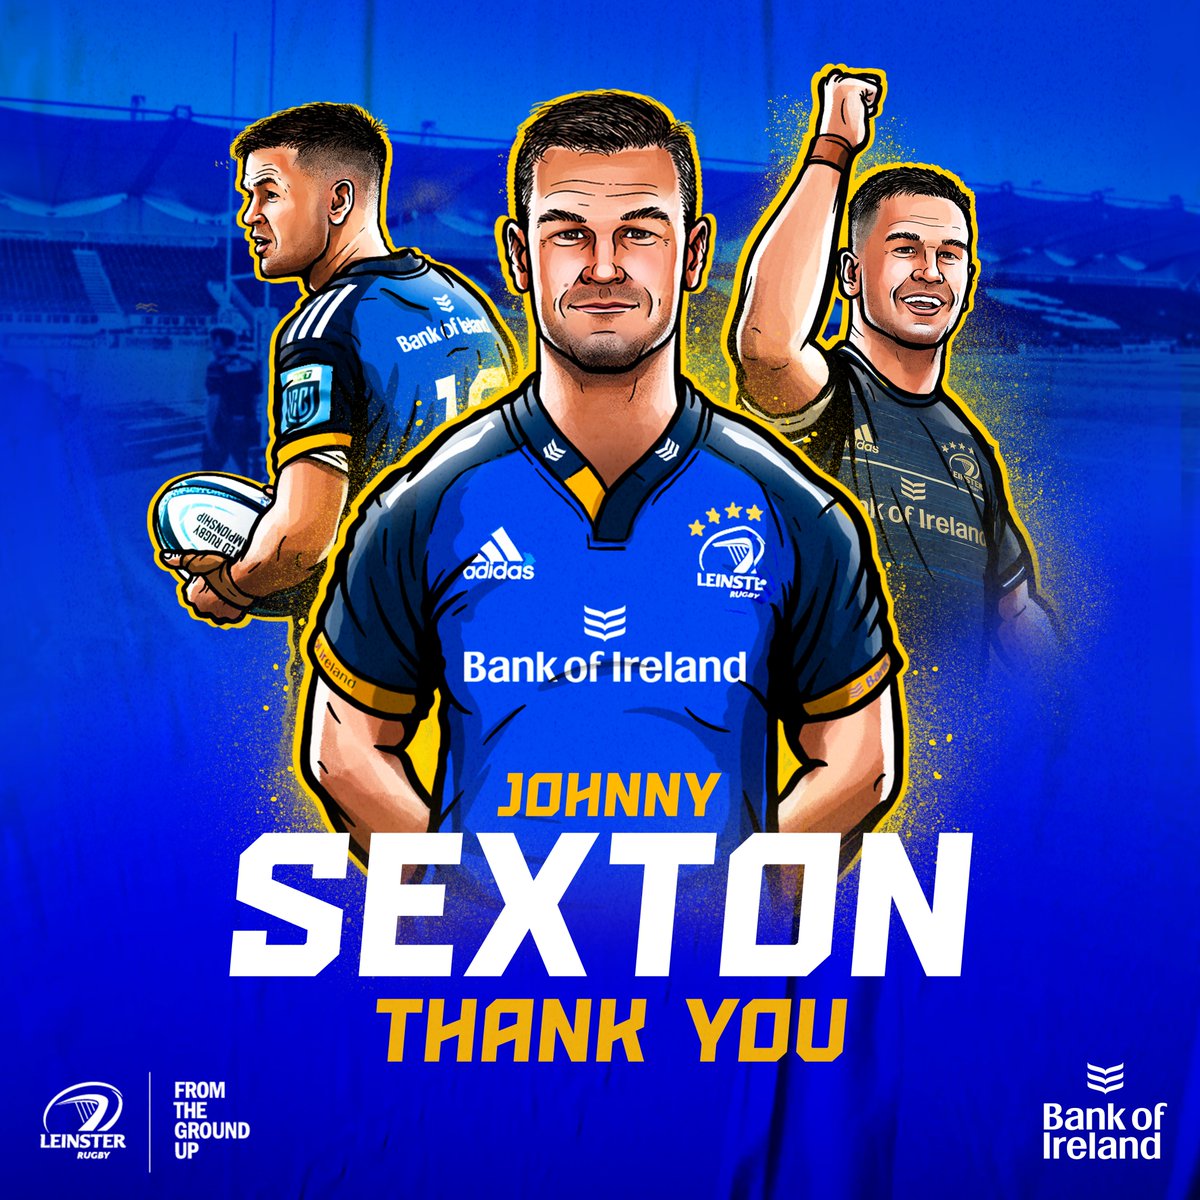 After 189 caps and 1,646 points, we say goodbye to one of the greatest players to ever wear the blue jersey. 👕

From Edinburgh in '09, the comeback in Cardiff in '11 to Bilbao in '18, Johnny Sexton has been there for it all.

Memories we'll never forget. 🙌

#ThanksJohnny